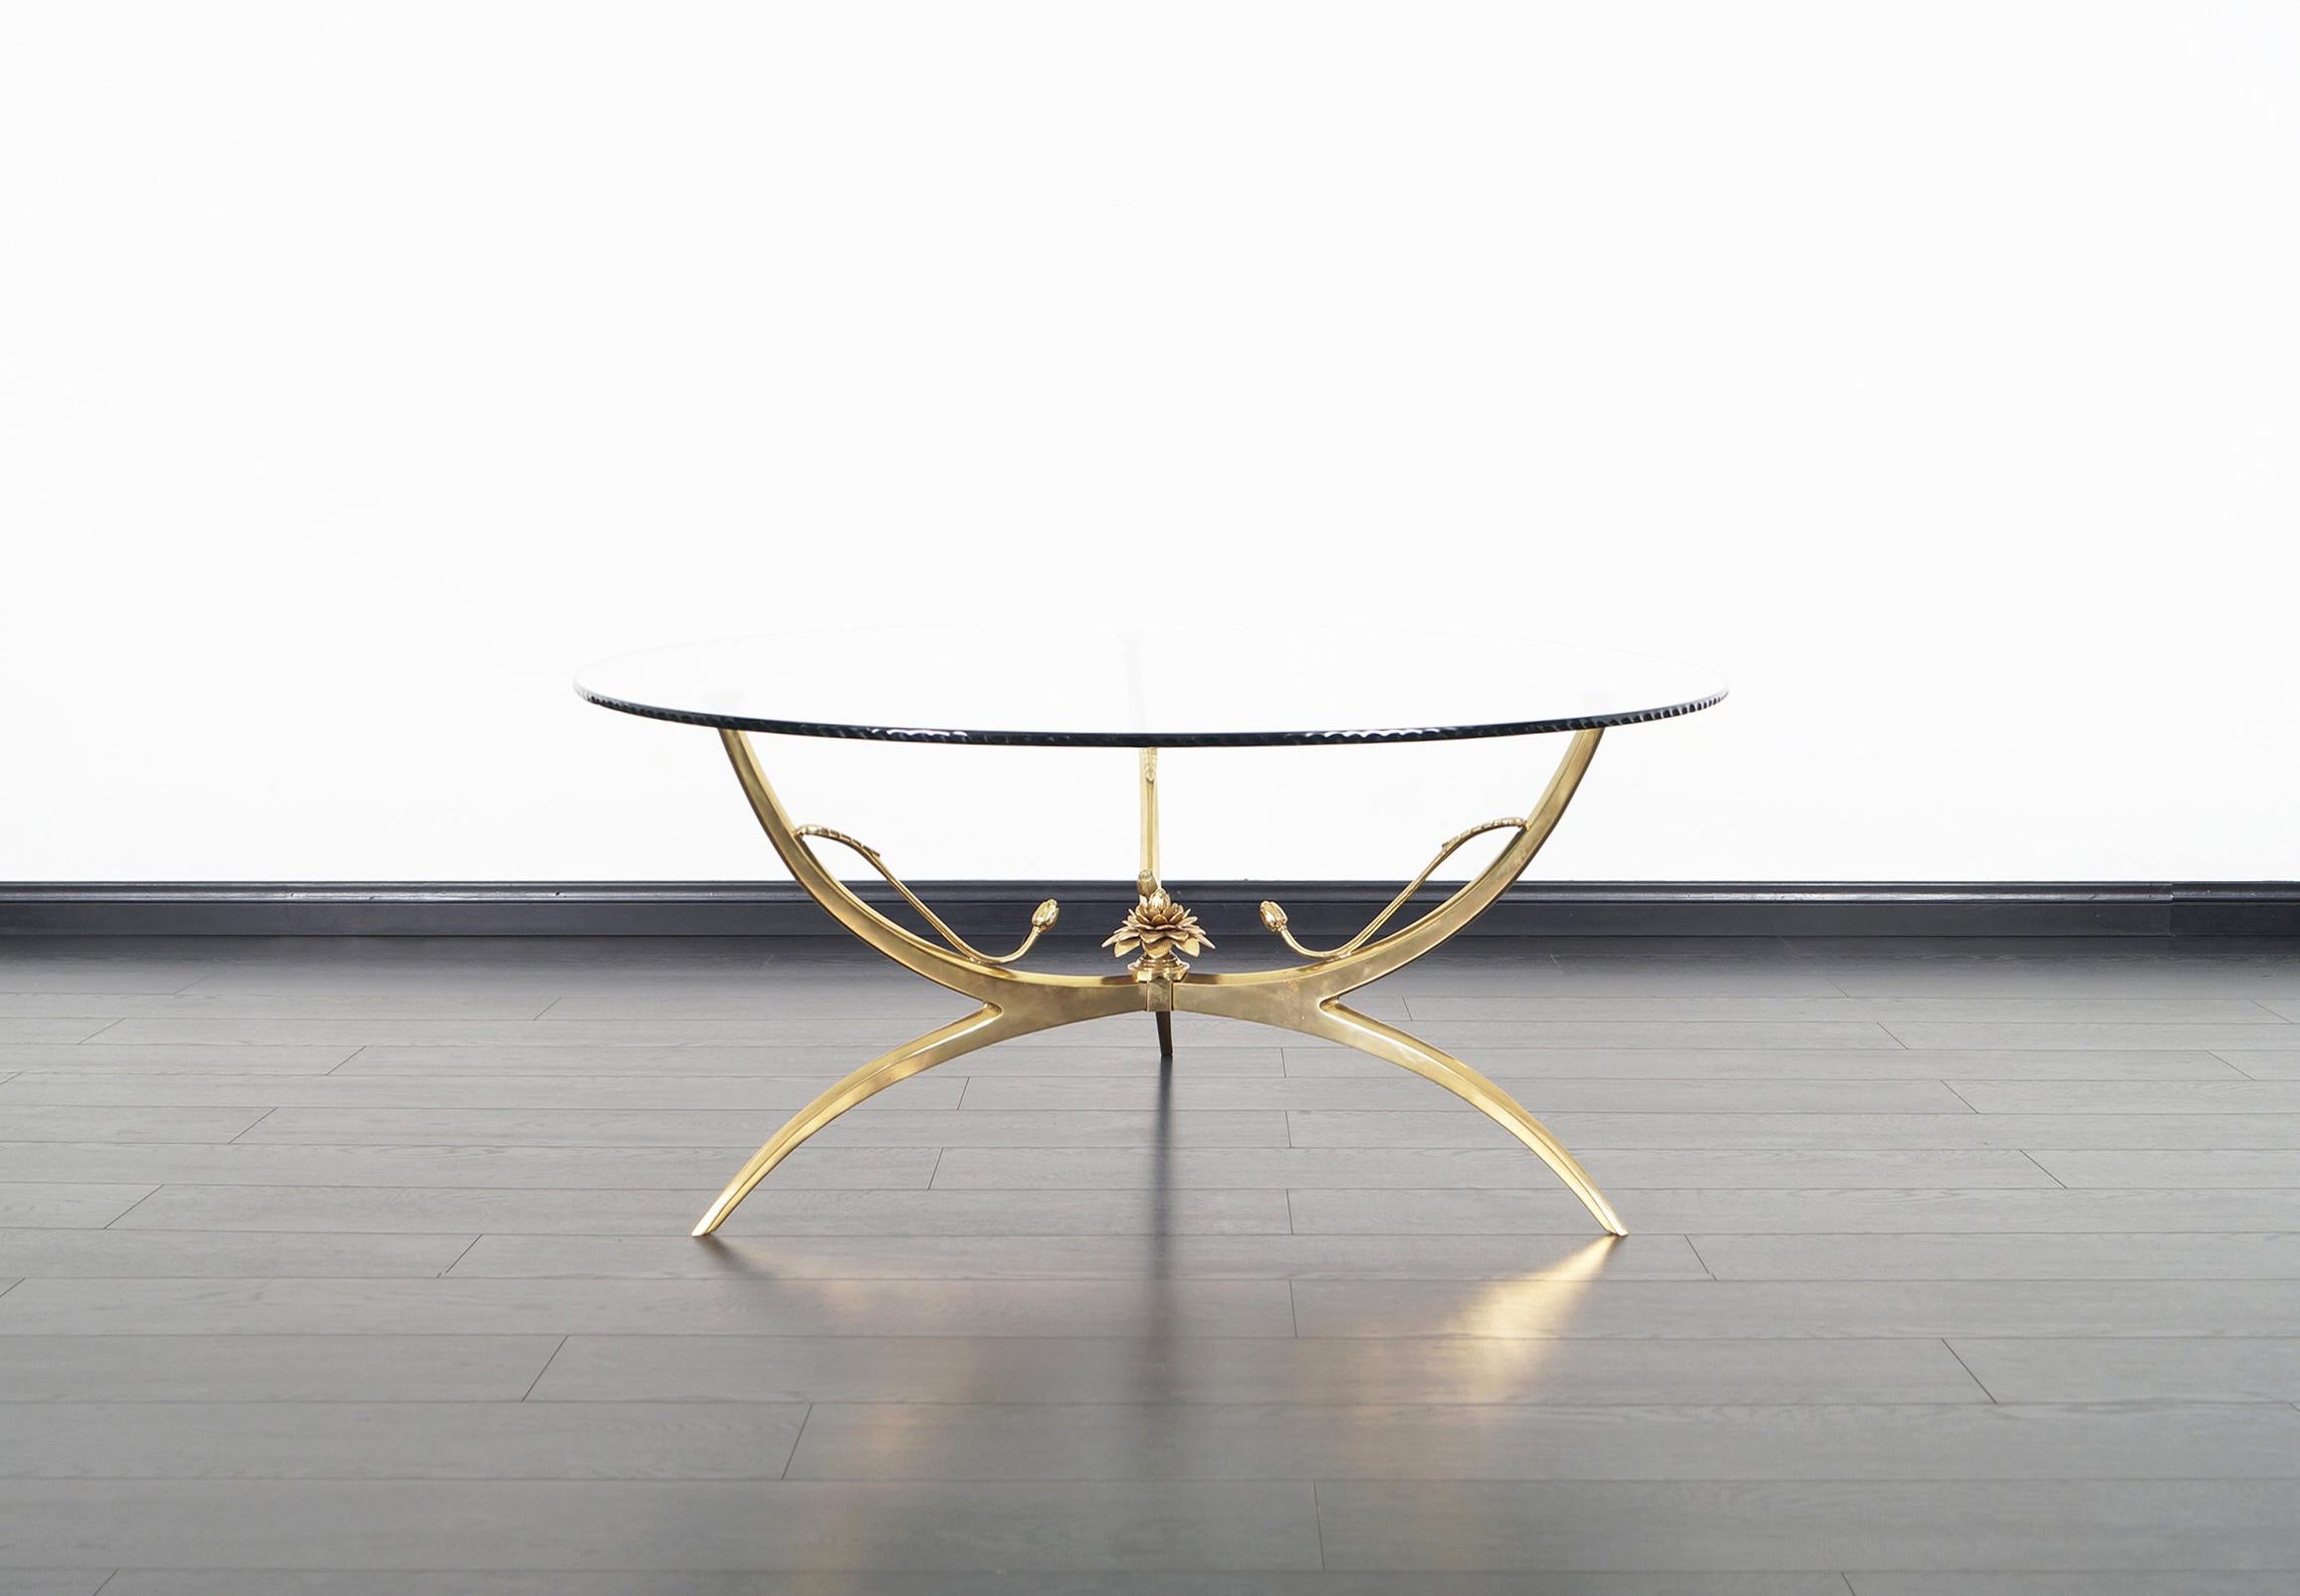 Elegant vintage brass coffee table designed in Italy, circa 1970s. This beautiful table features a solid brass base with a lotus flower in the center, supporting the original glass top which features an artistic wave-edge finish.